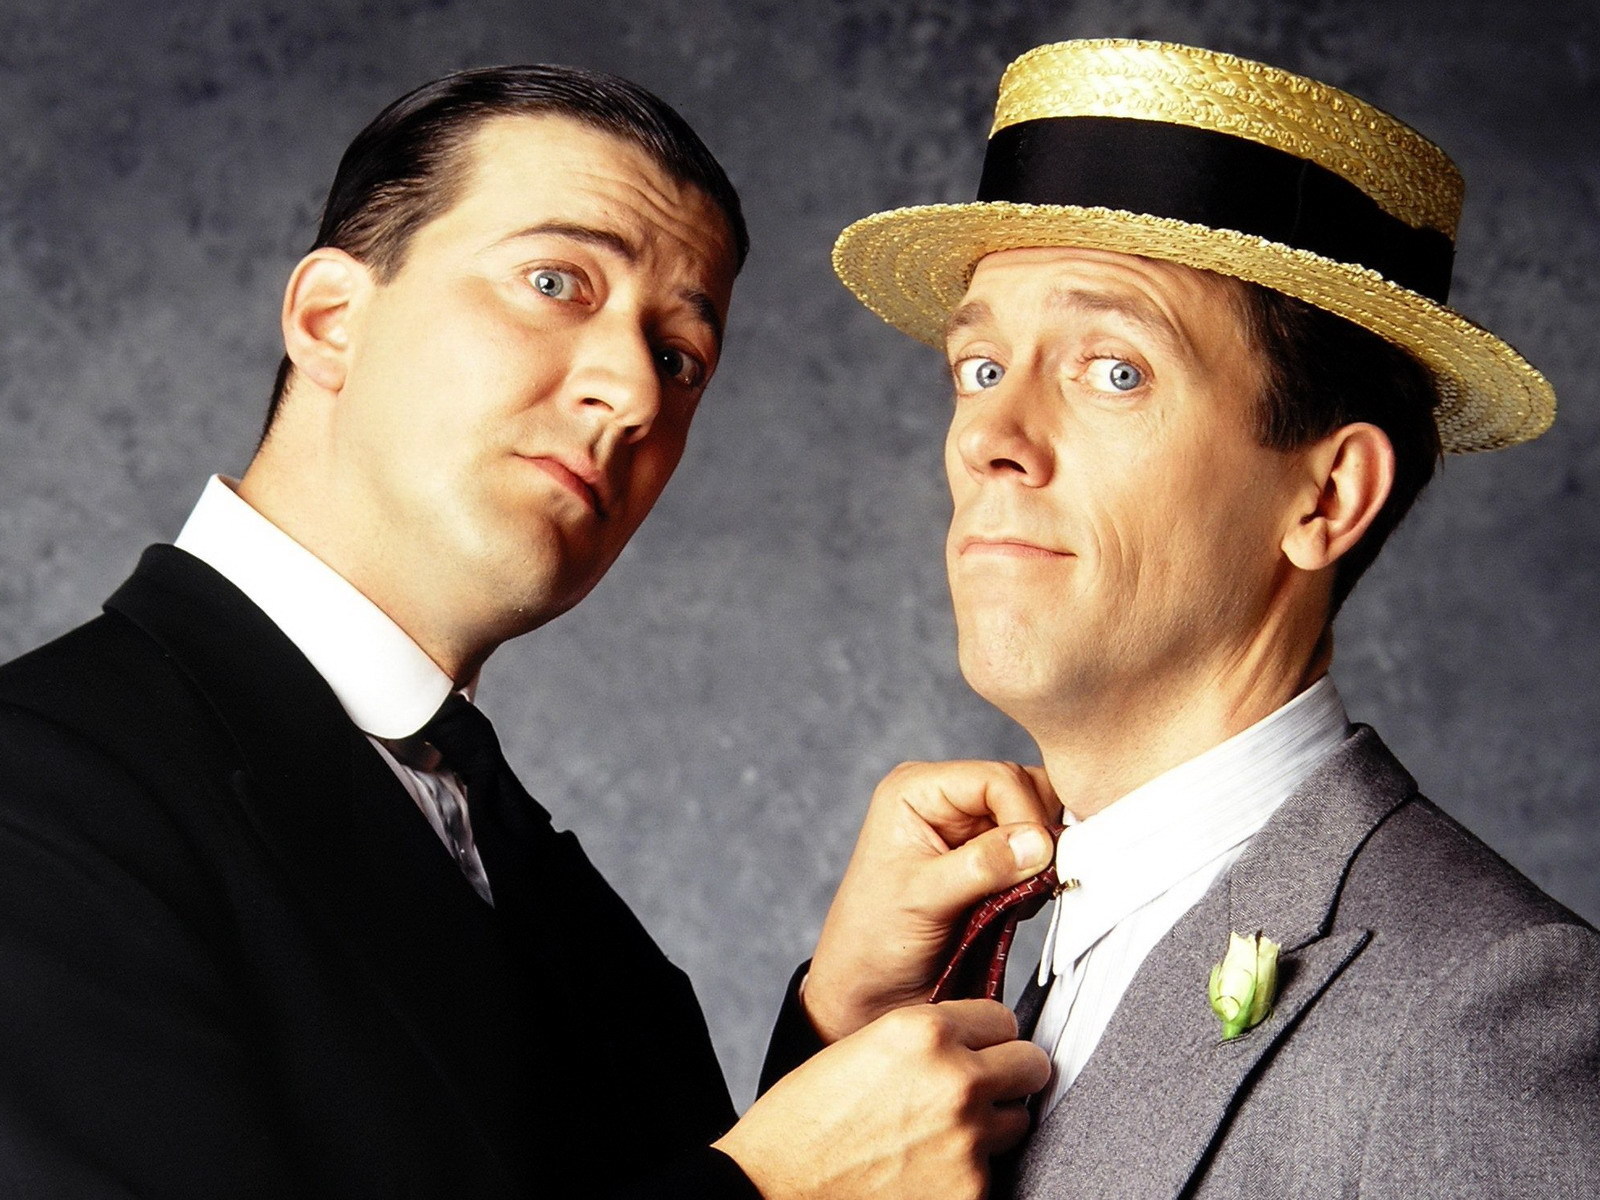 http://3.bp.blogspot.com/-o6OQuI1oqgg/T2kYMmJNXAI/AAAAAAAAB64/UD7Z_0oHwT4/s1600/Jeeves-and-Wooster-jeeves-and-wooster-18685737-1600-1200.jpg